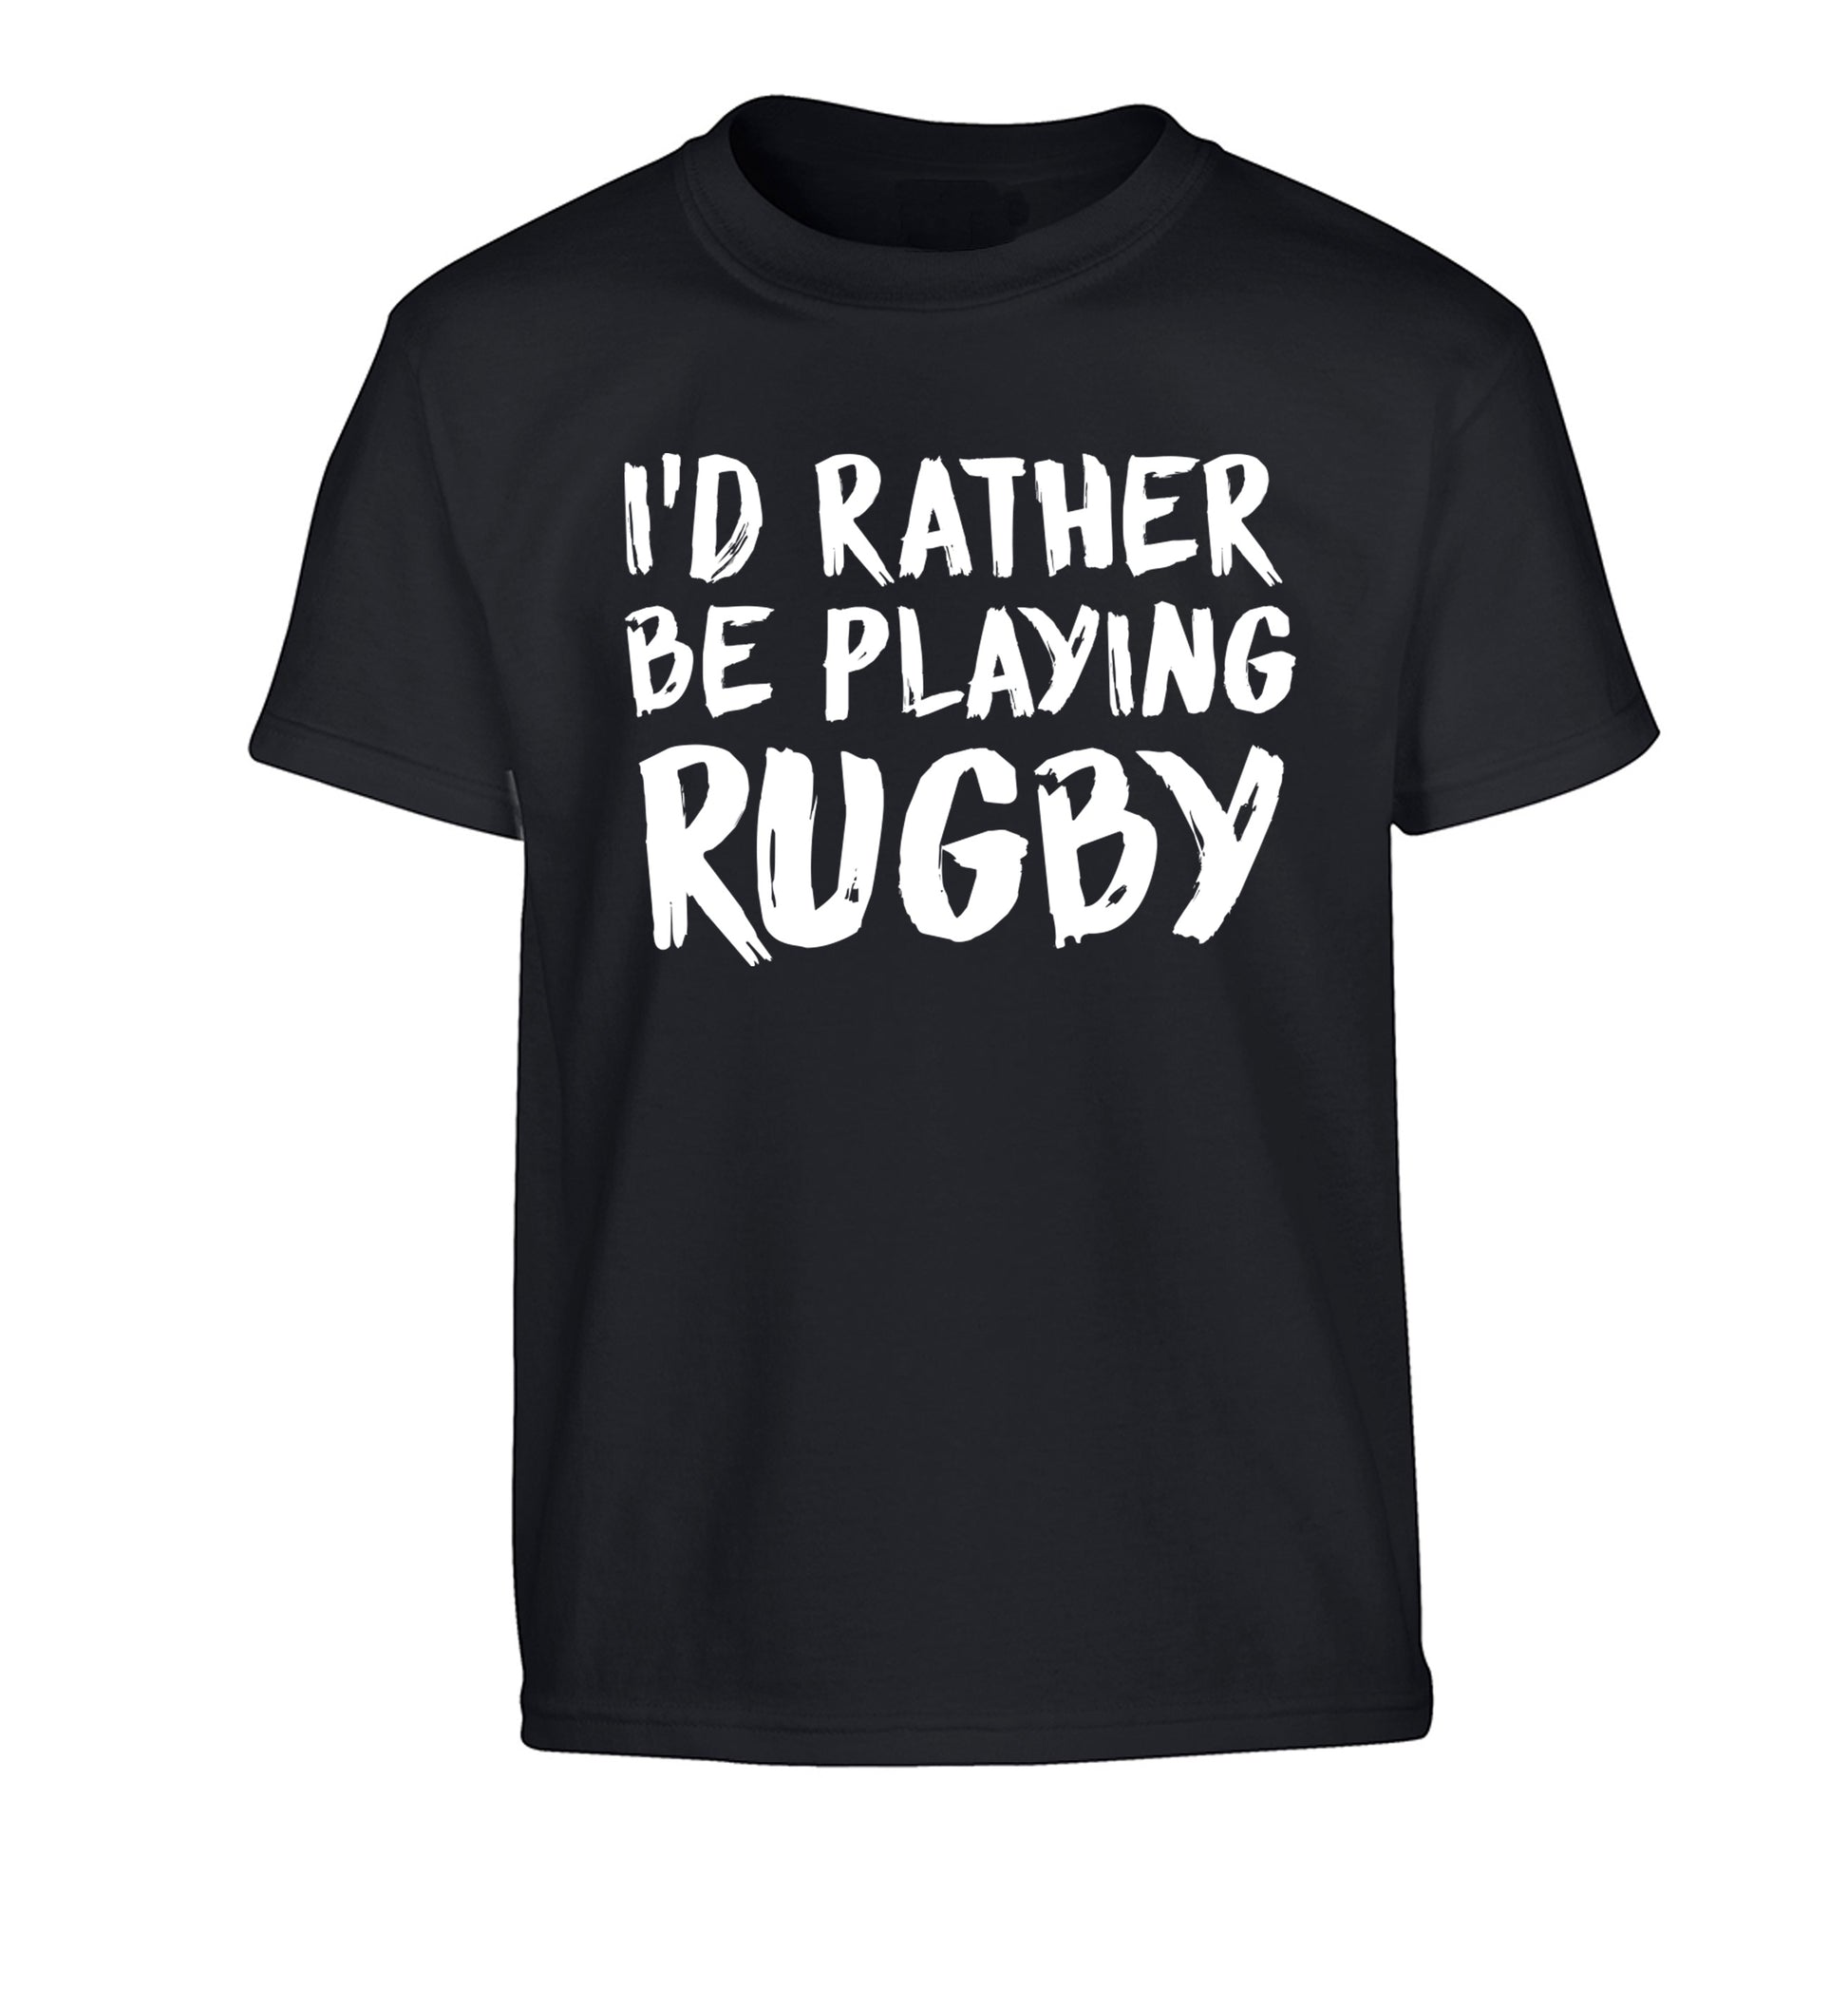 I'd rather be playing rugby Children's black Tshirt 12-13 Years